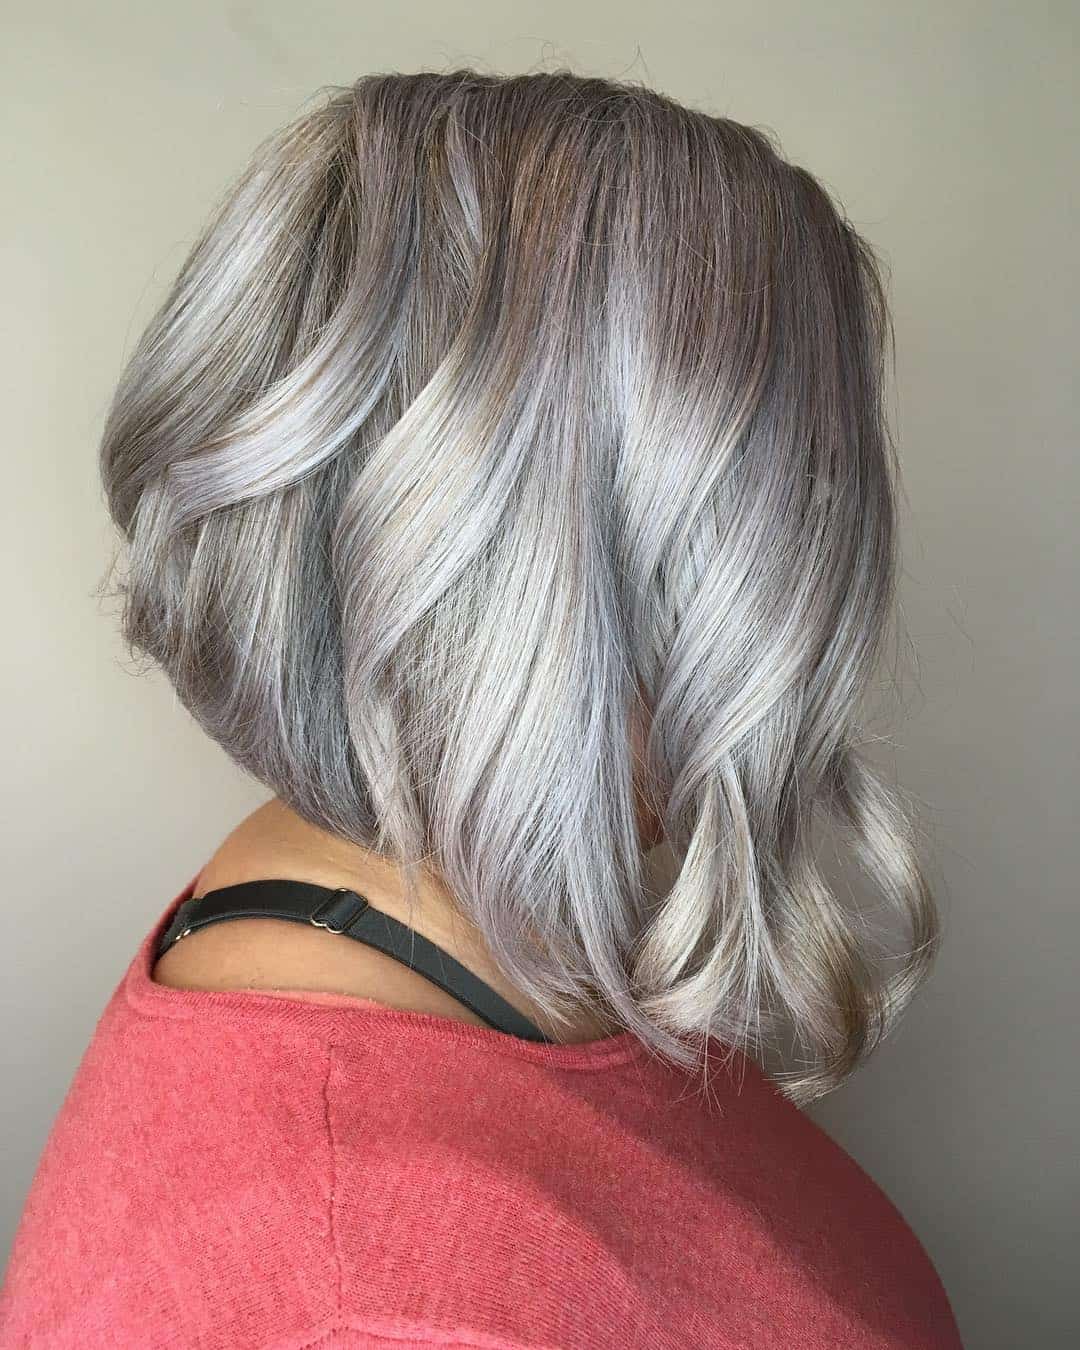 Ash Blond To Silver Balayage On Curled Inverted Bob